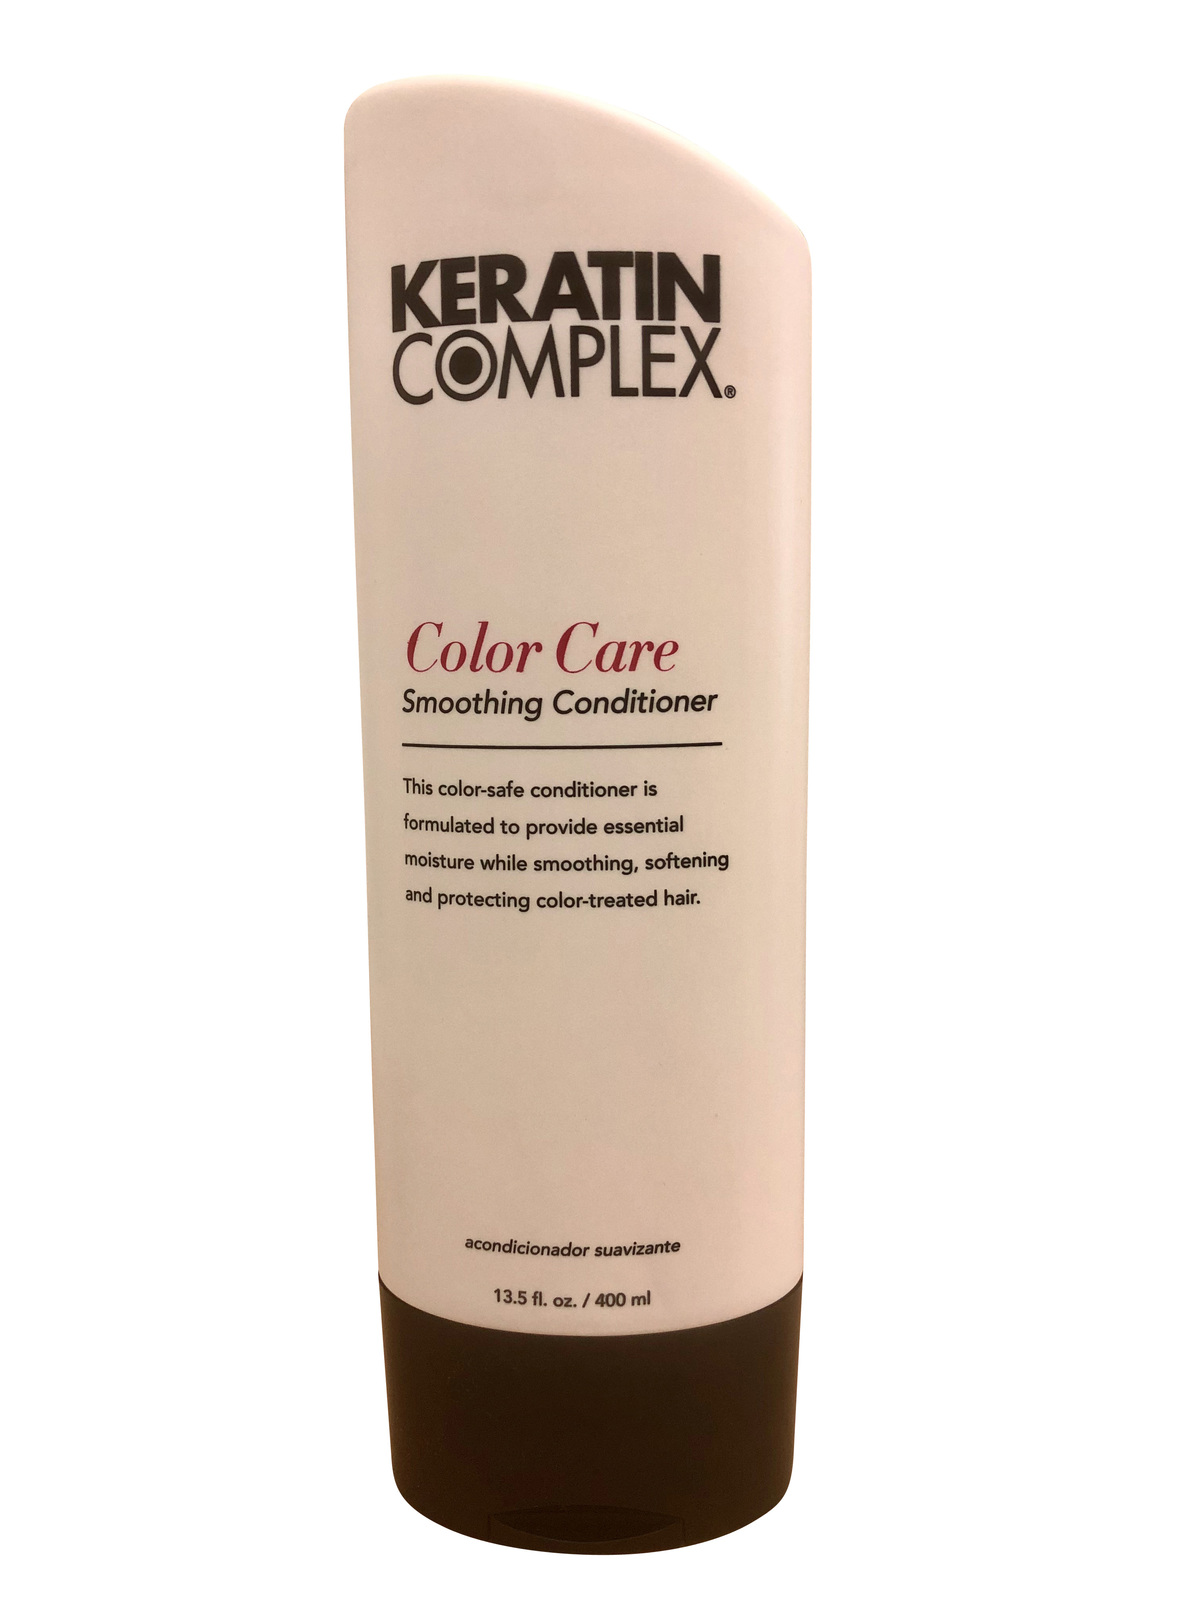 Keratin Complex Color Care Smoothing Conditioner 13.5 oz. - $14.26